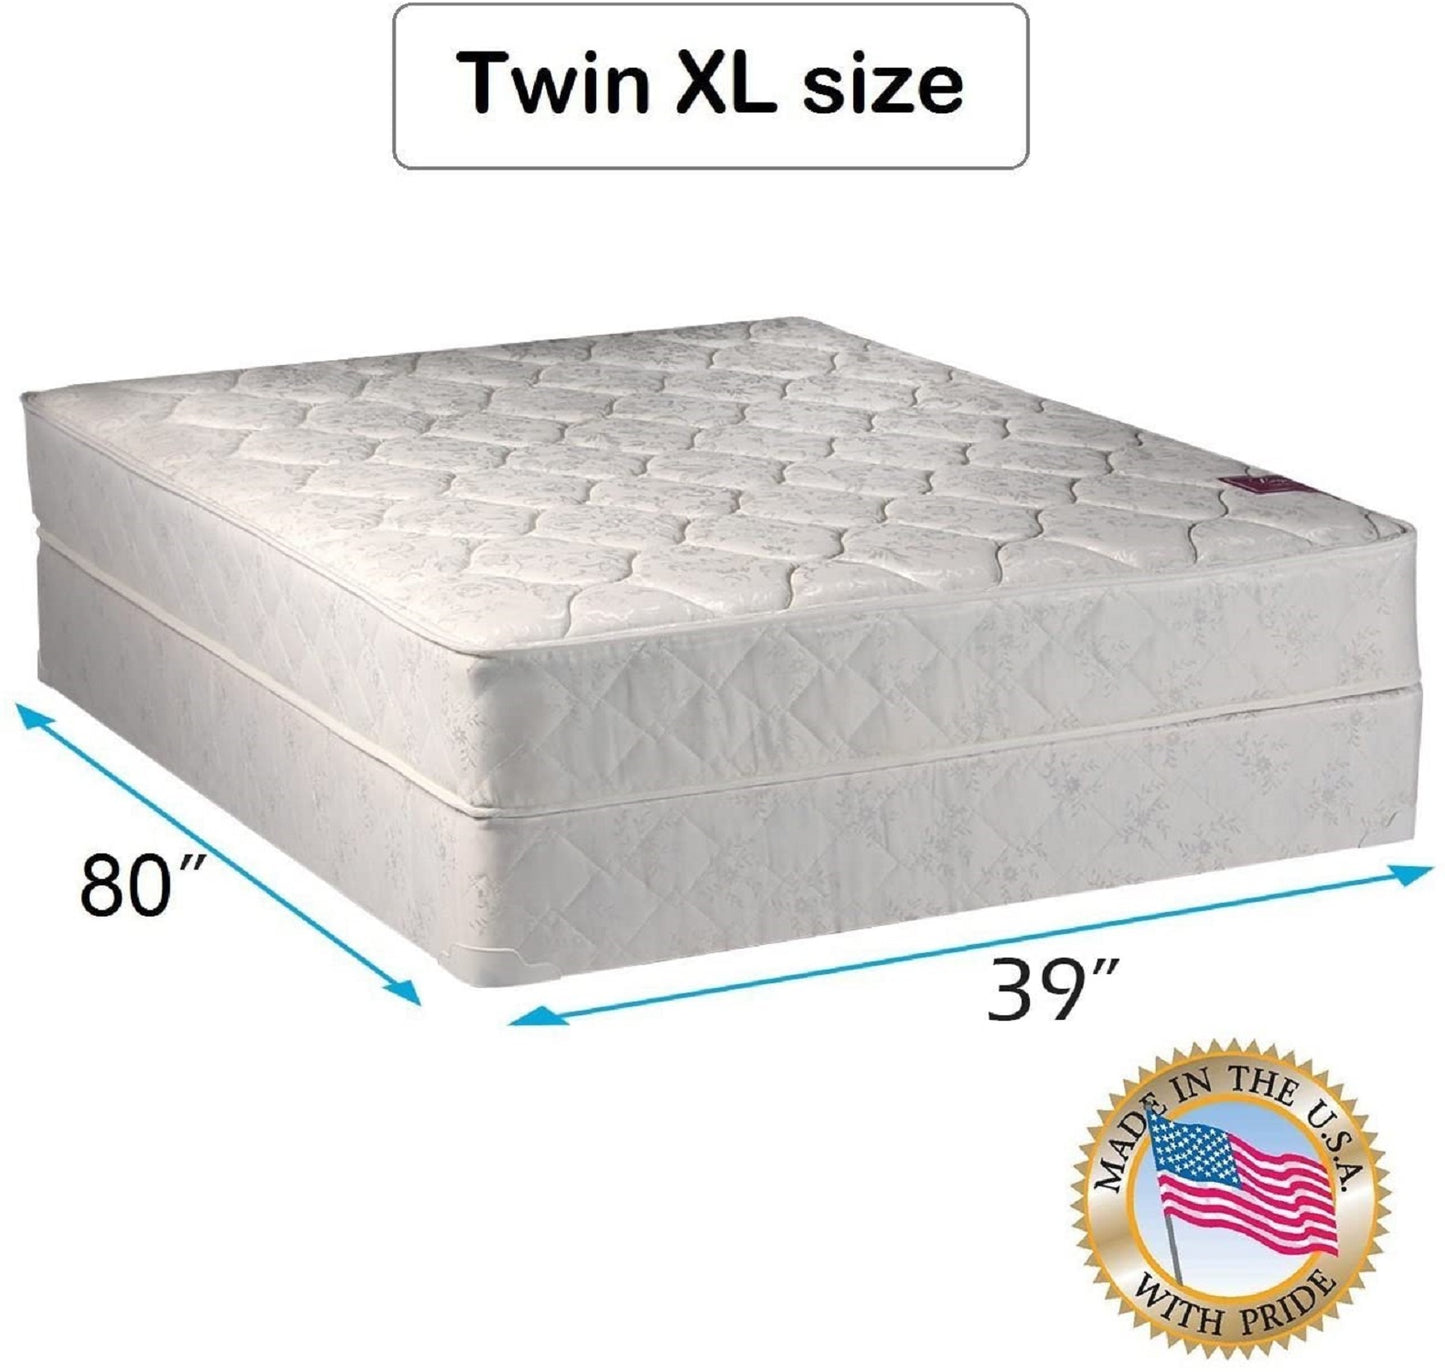 Legacy Gentle Firm Twin XL Size Mattress and Box Spring Set - One Sided